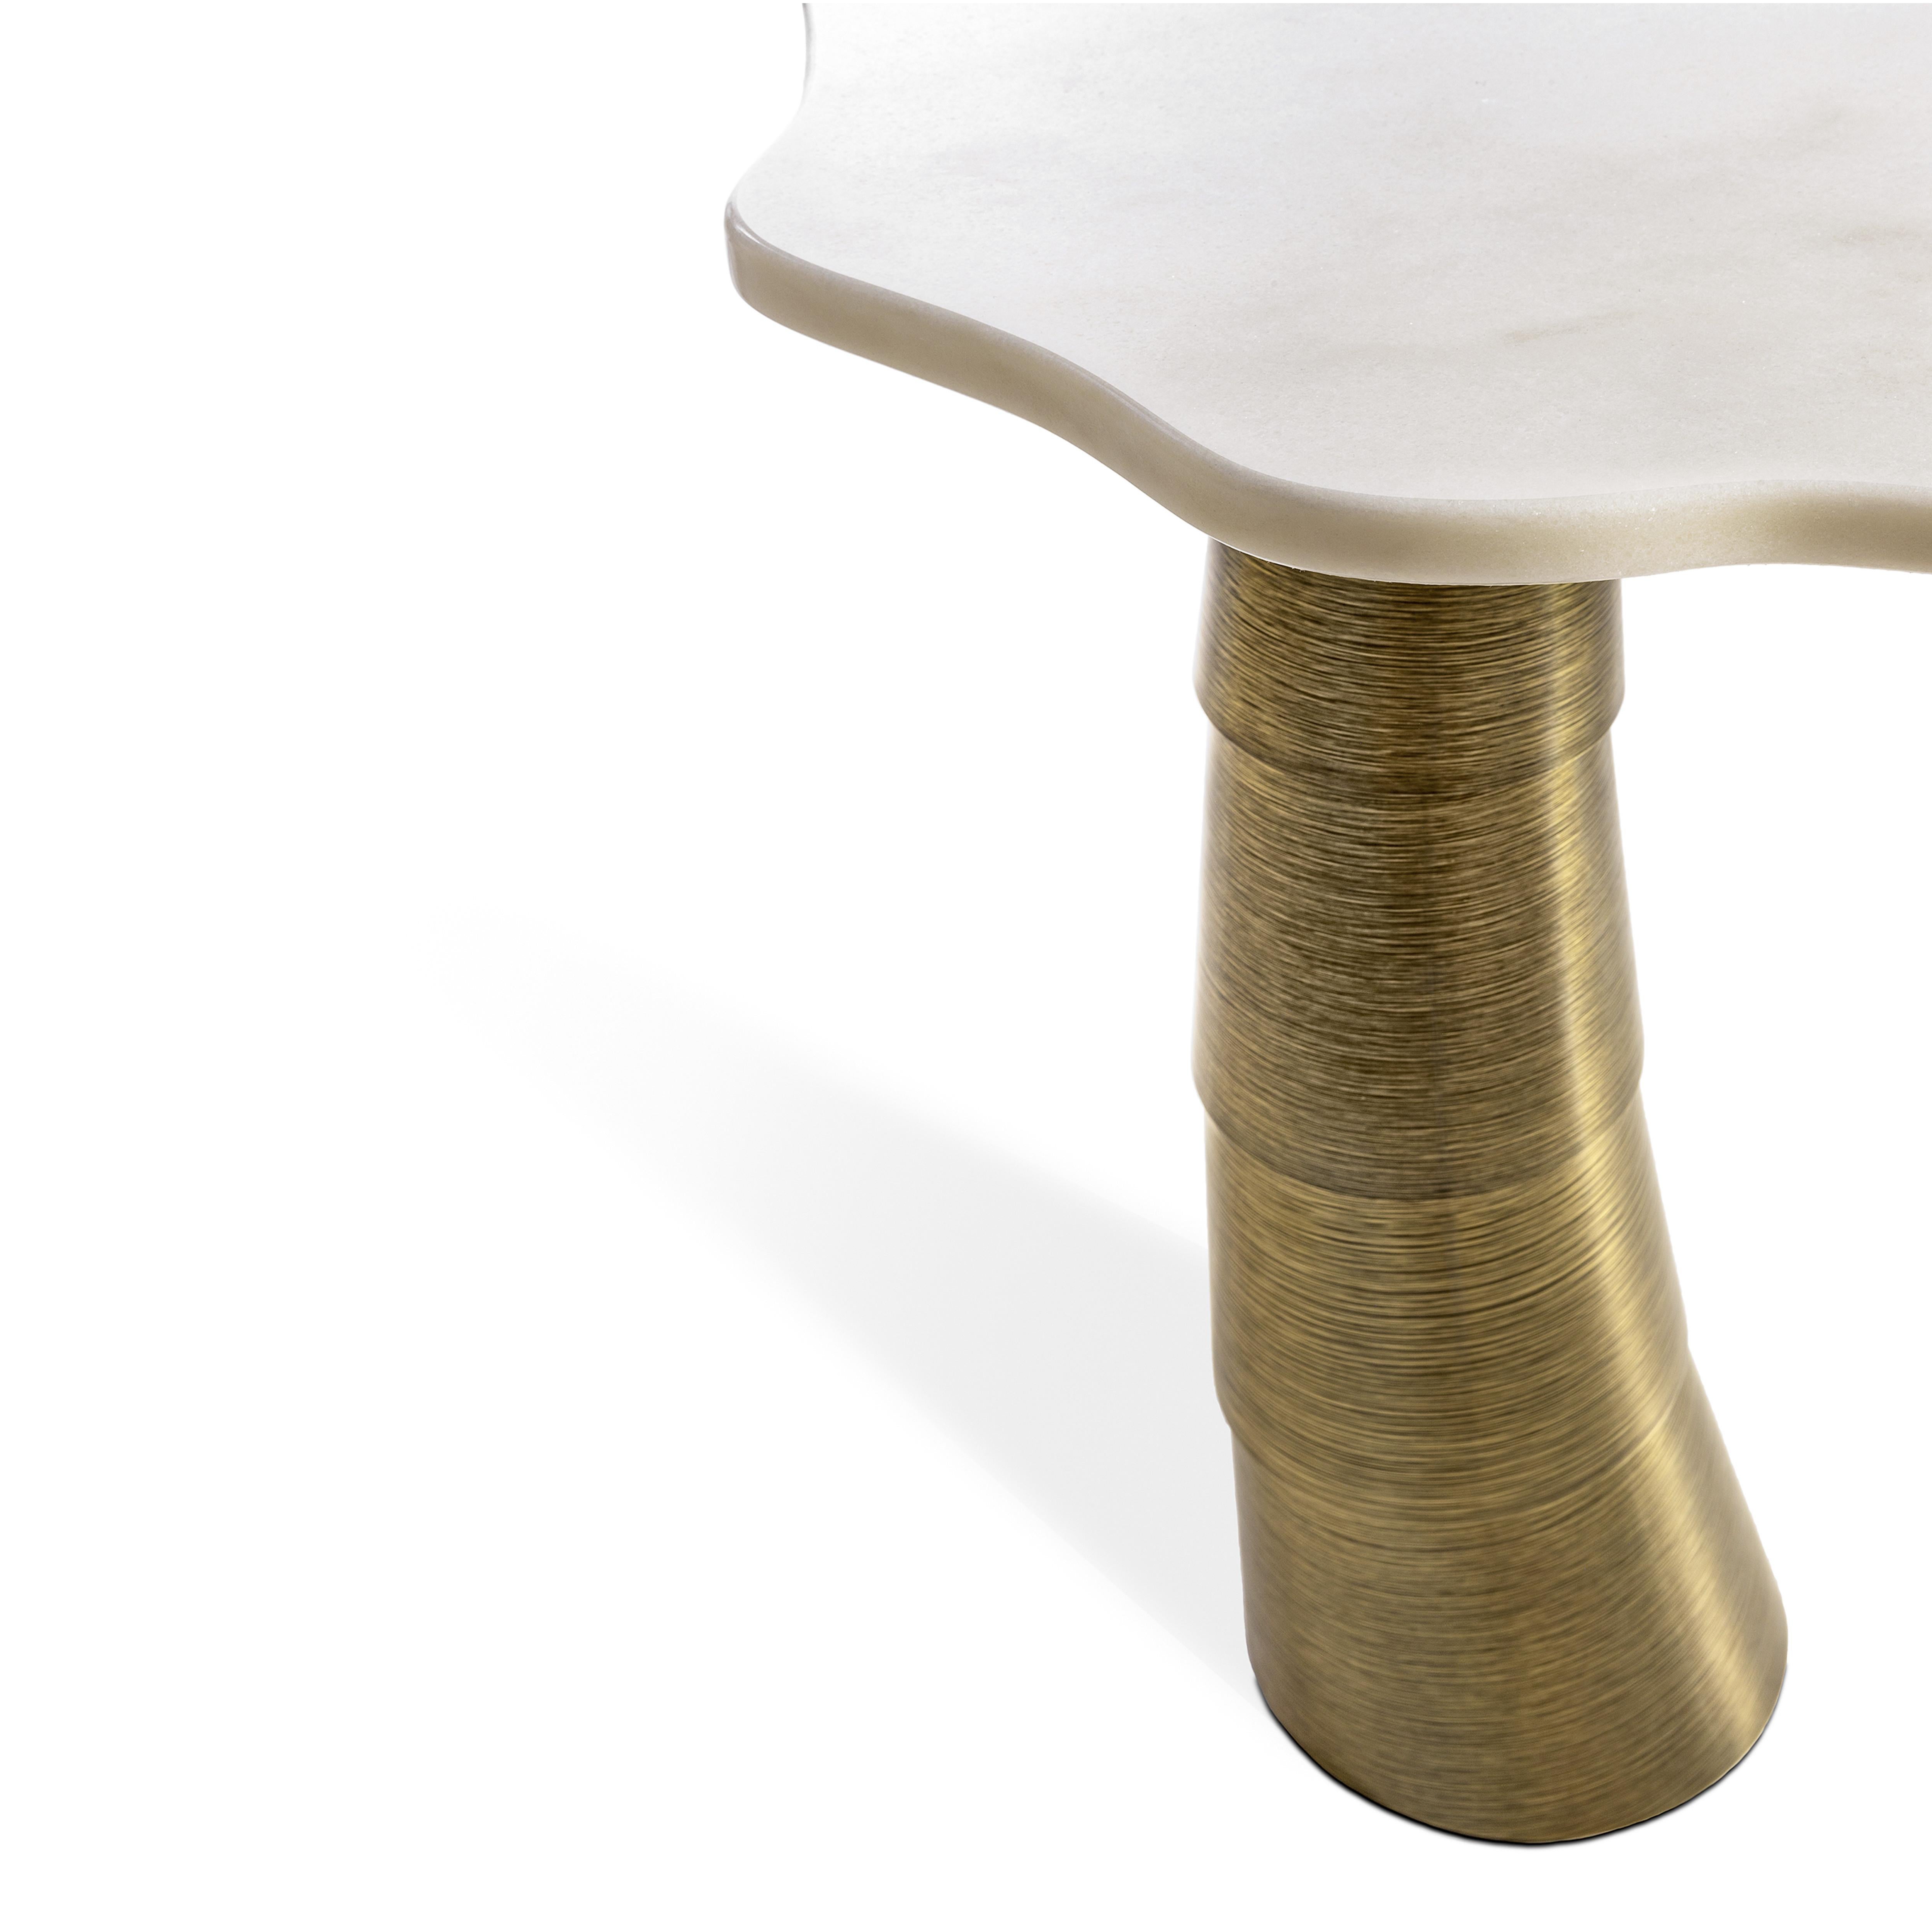 Modern Palm Side Table, Estremoz and Brass, InsidherLand by Joana Santos Barbosa For Sale